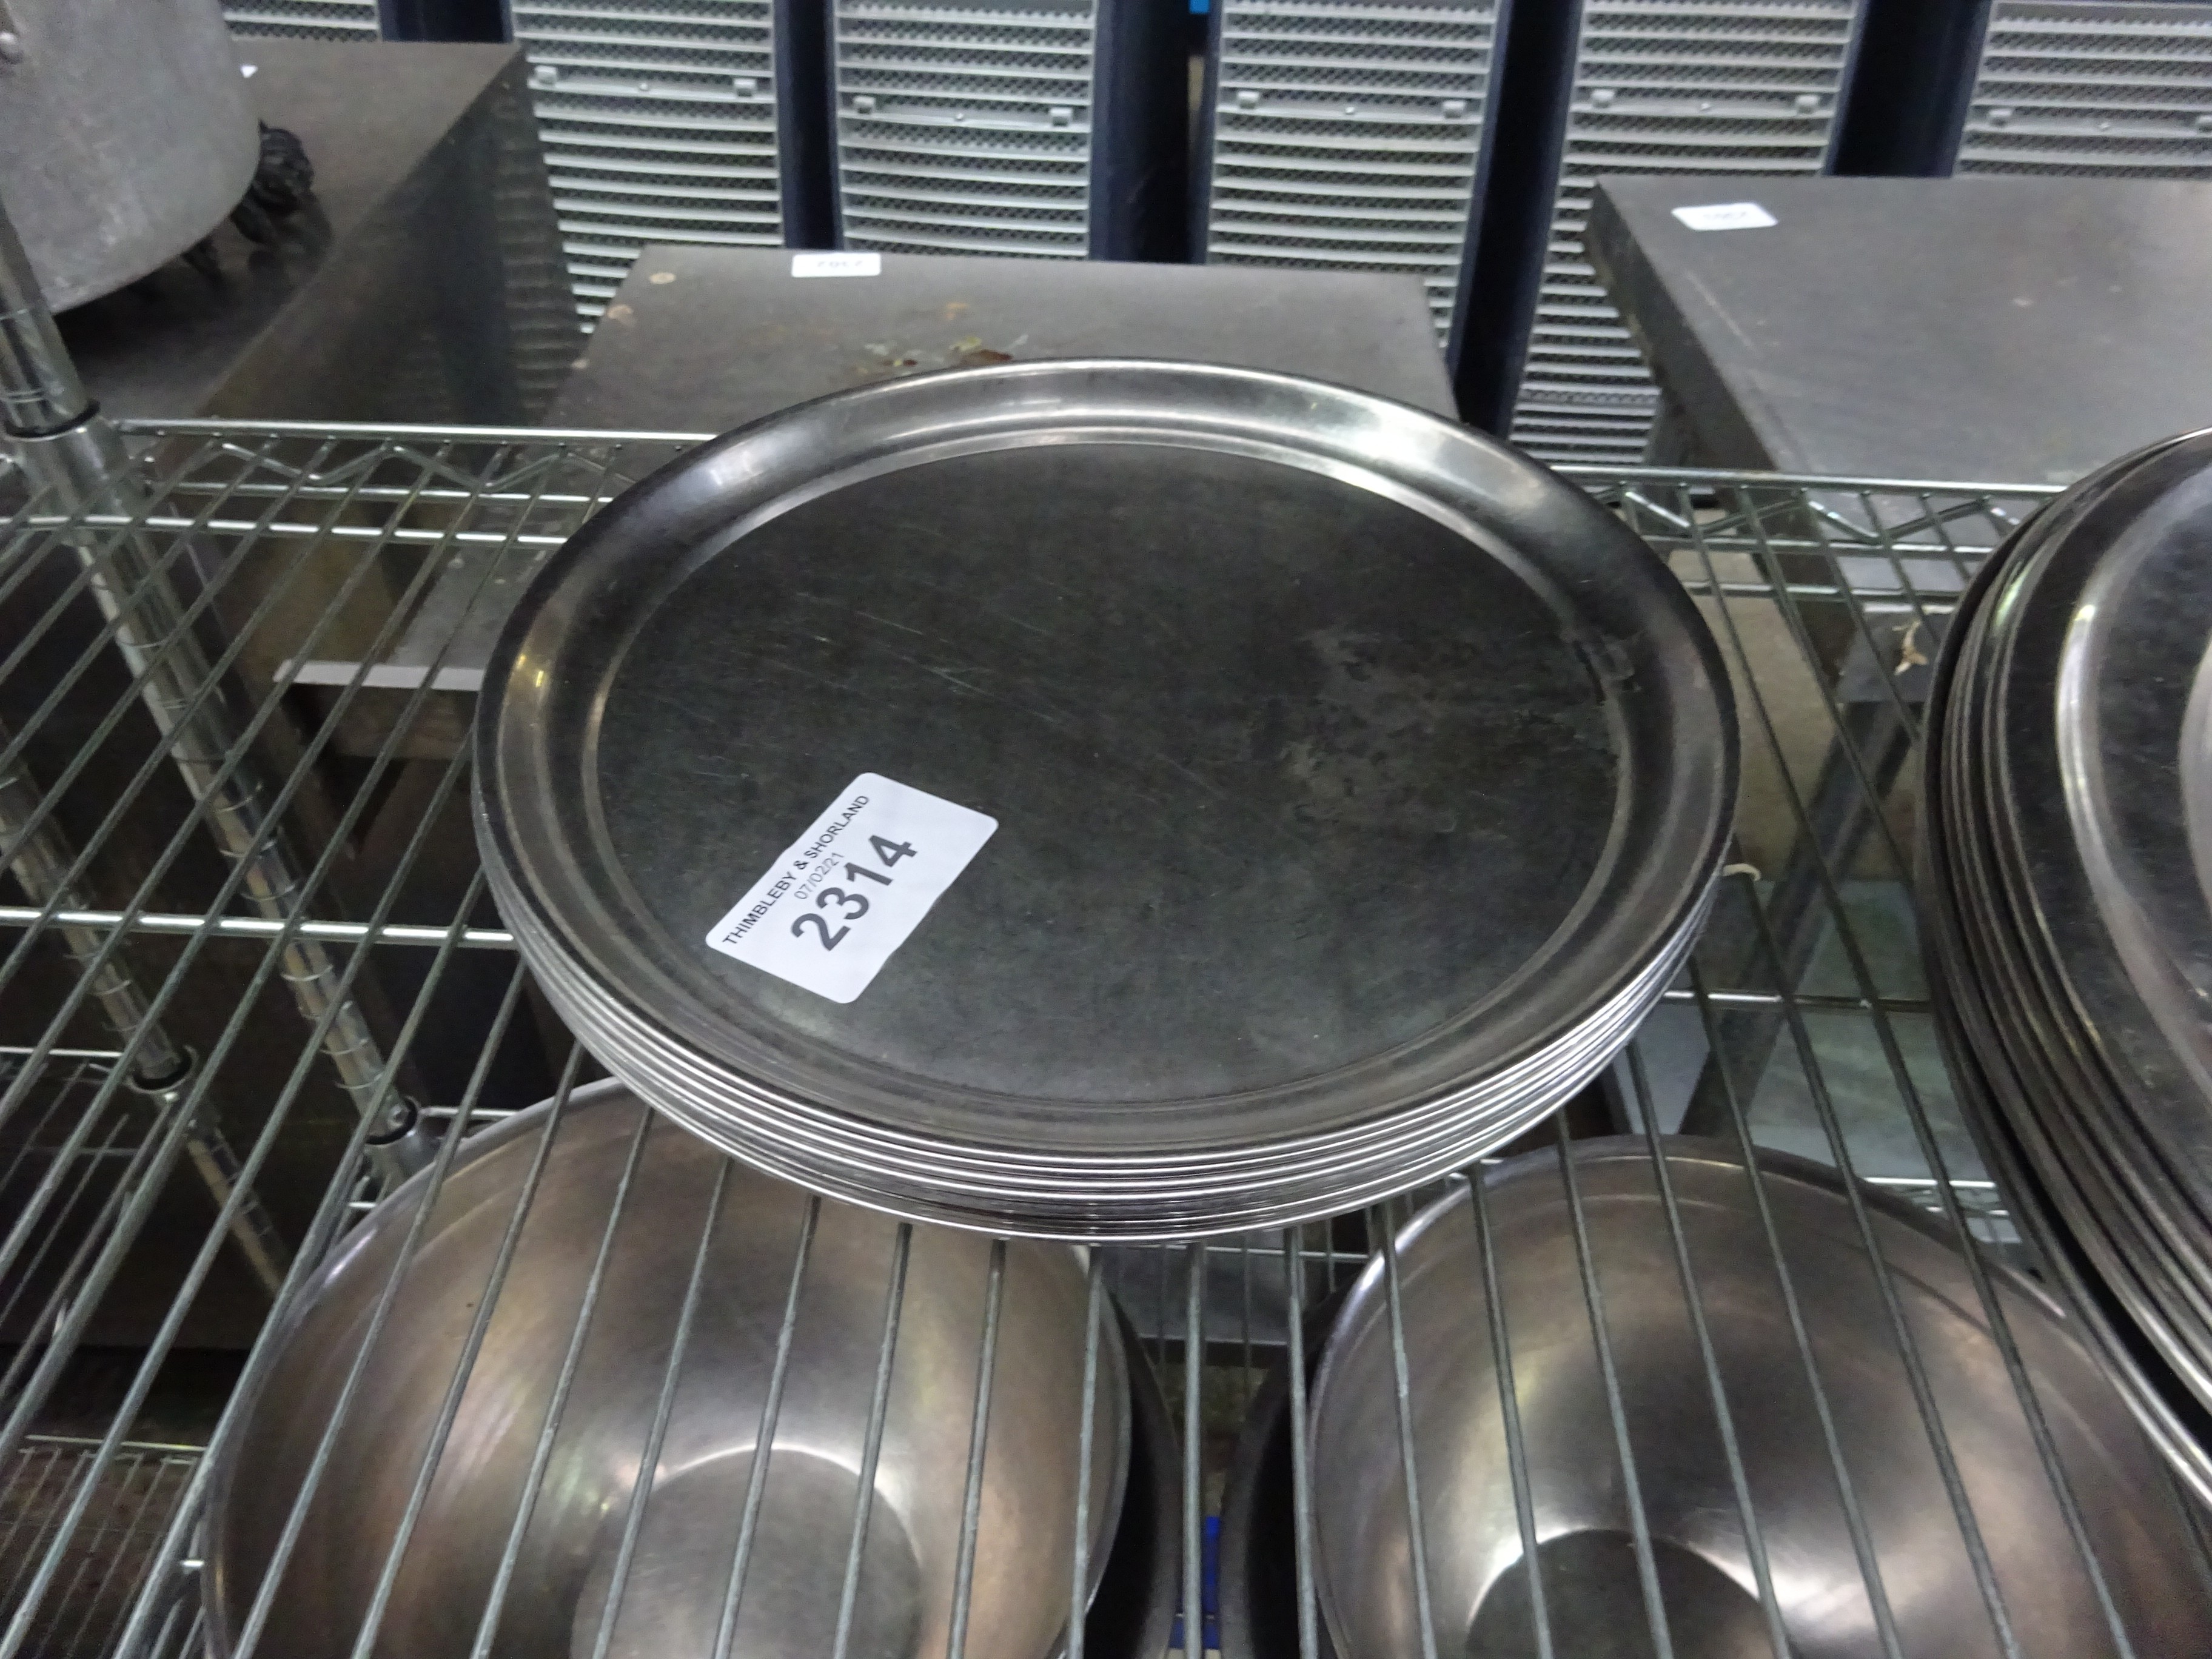 11 no Stainless steel serving trays